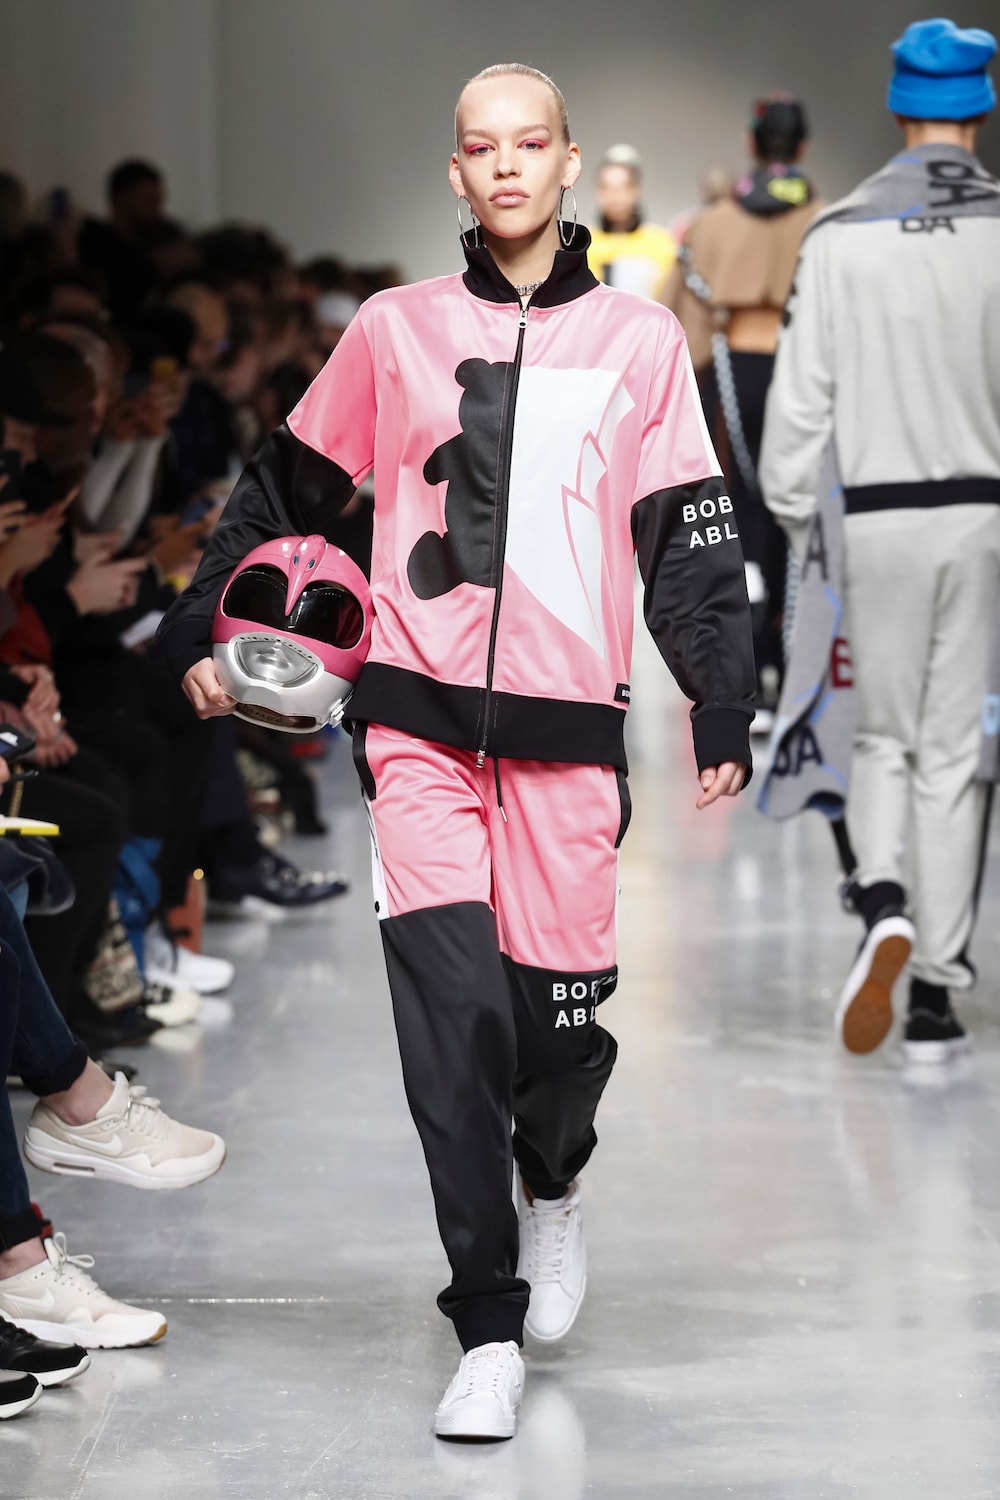 Bobby Abley Spotlights the Mighty Morphin Power Rangers for Its 2017 Fall/Winter Collection